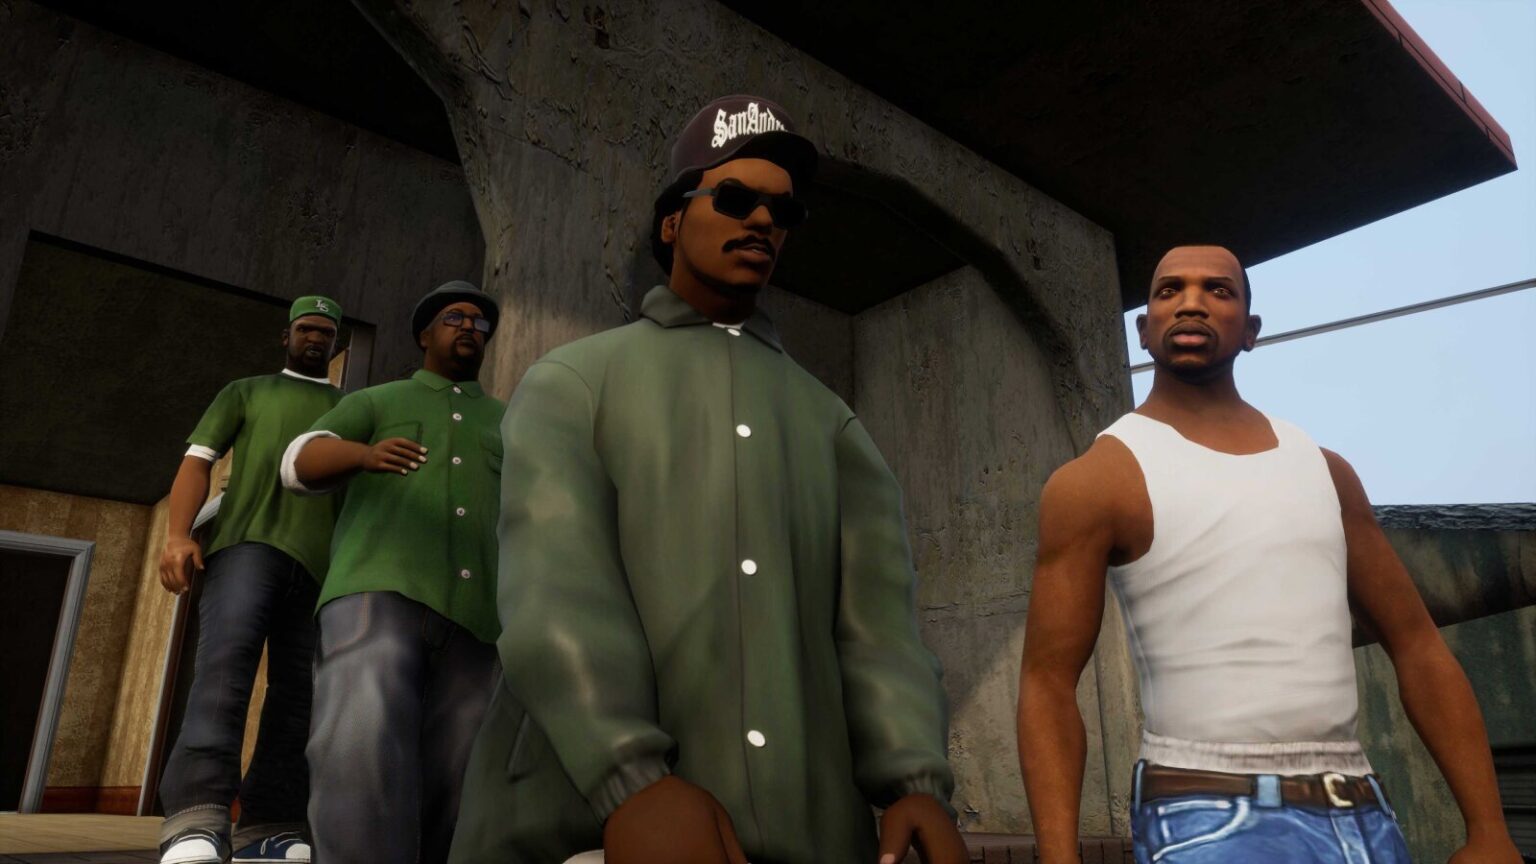 GTA San Andreas on Android and iOS: Everything players need to know